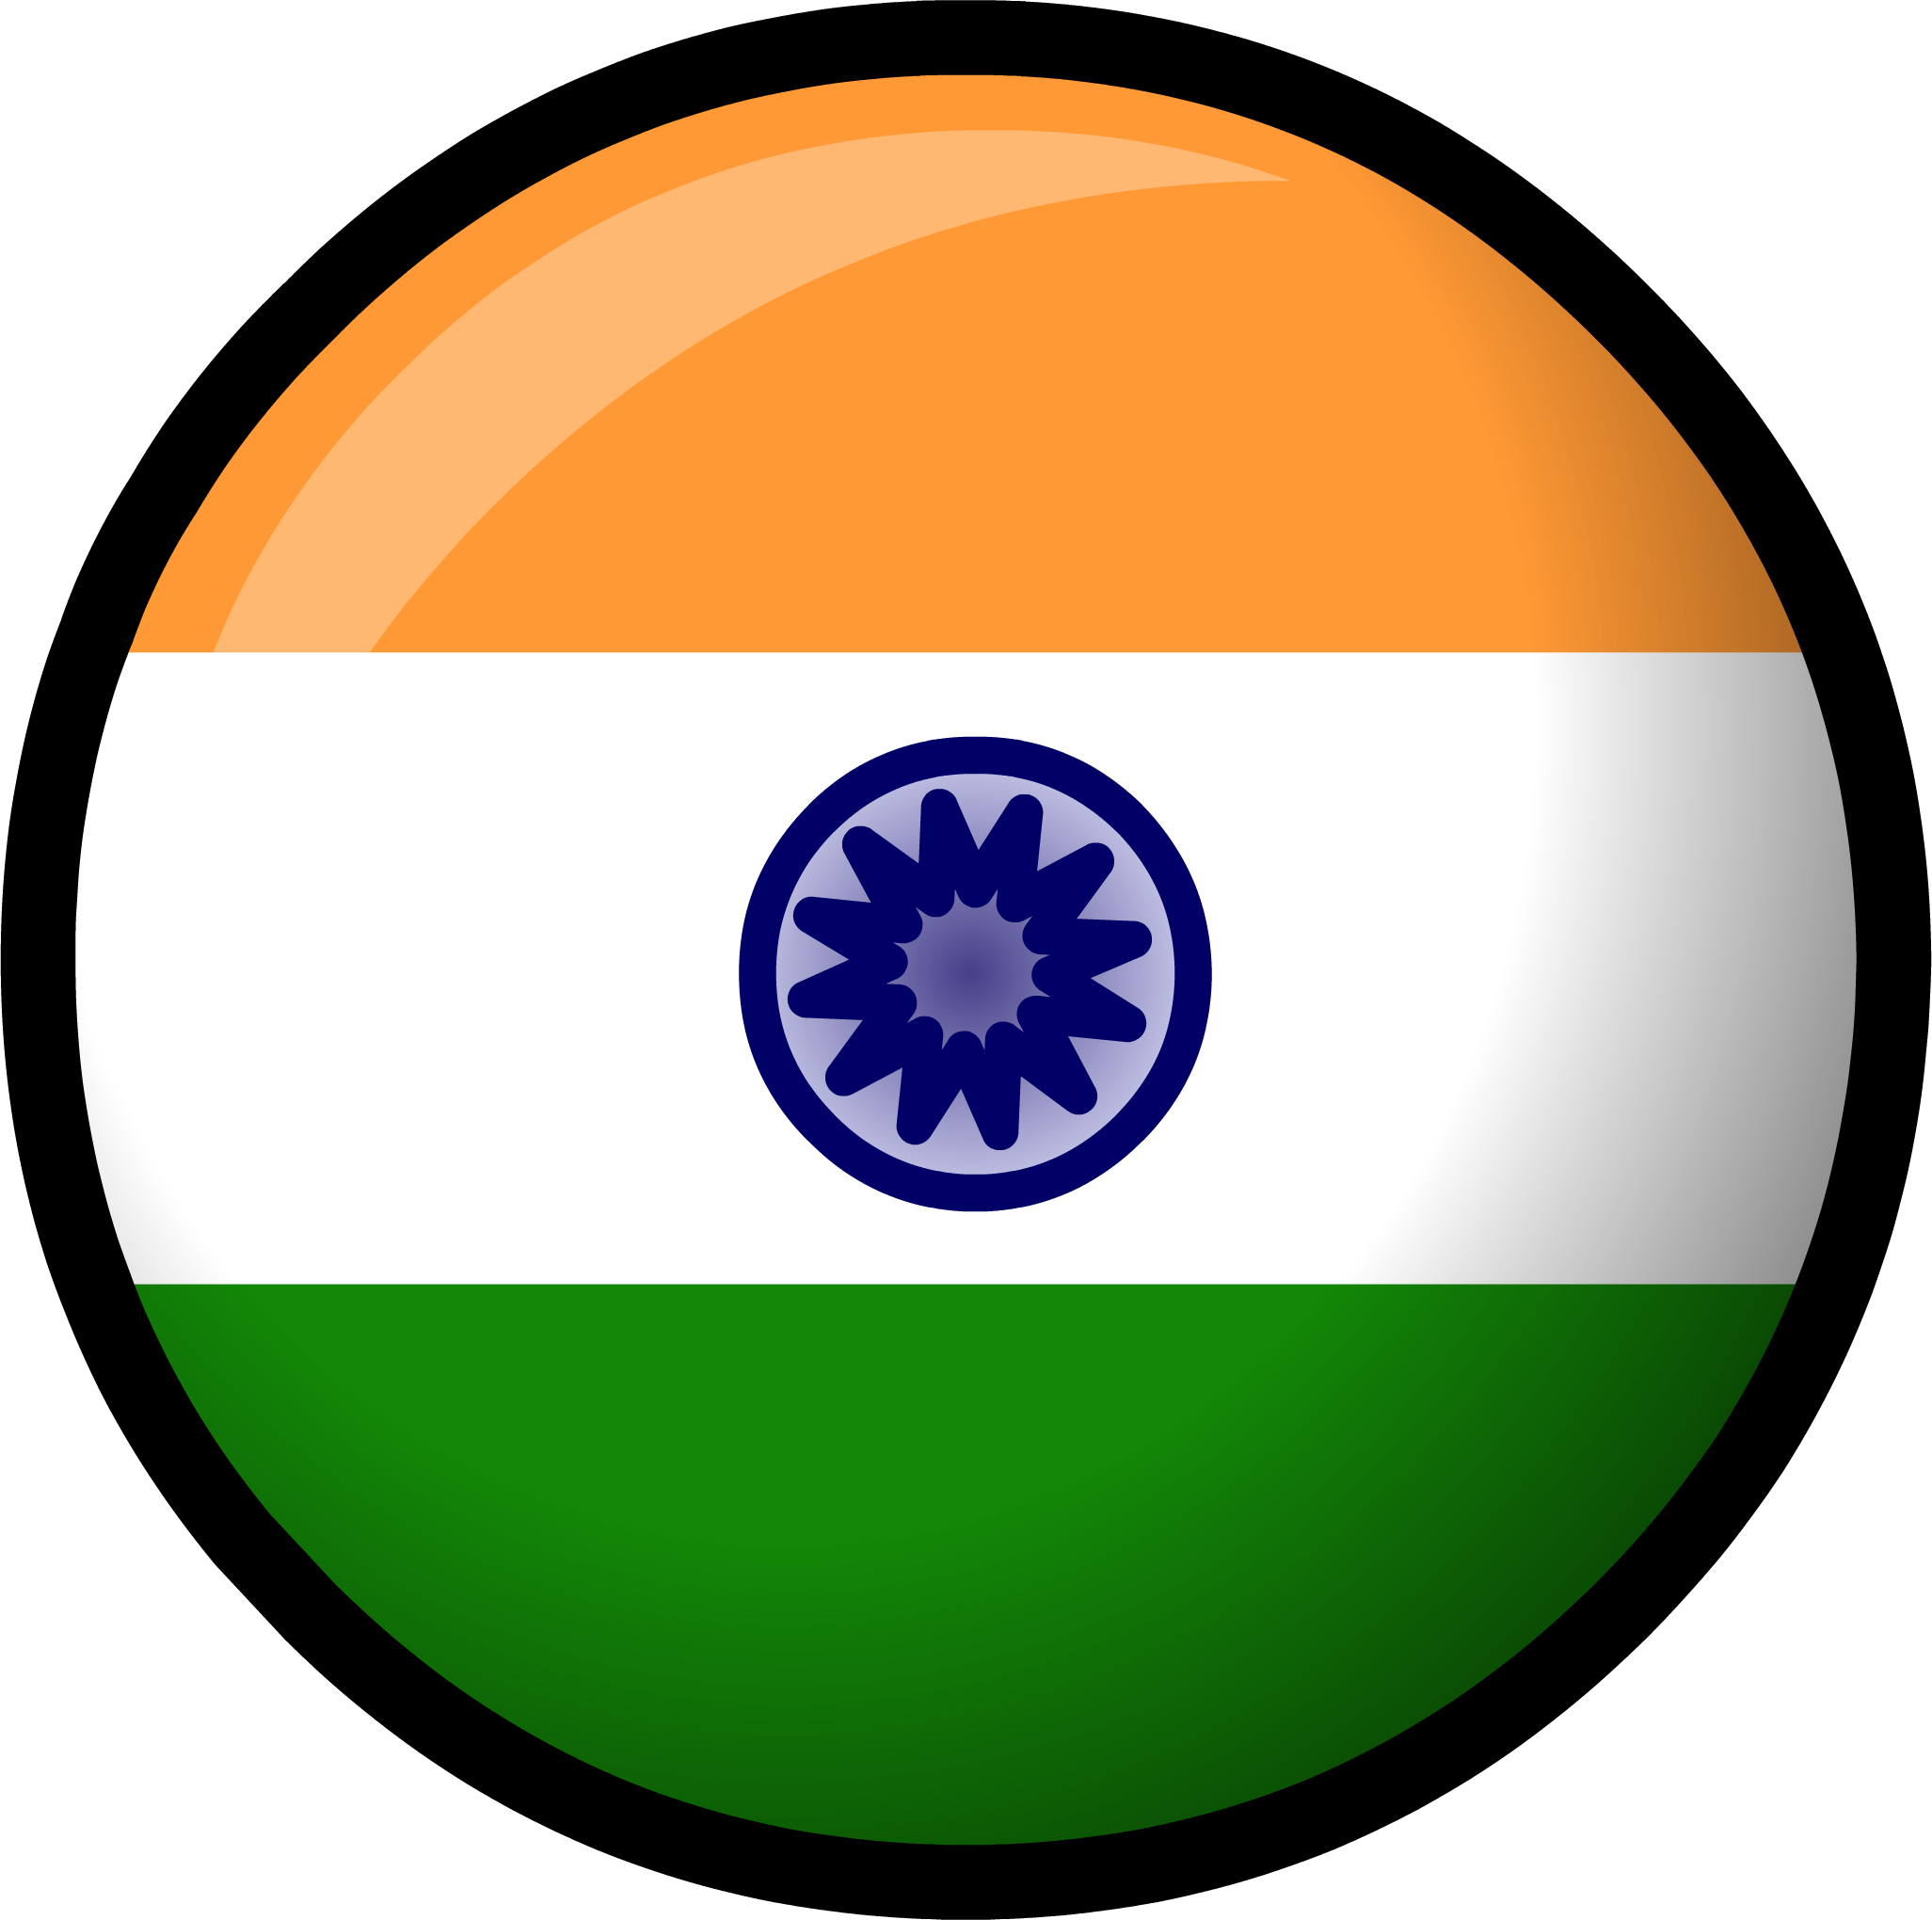 Download Image - India Flag clothing icon ID 527.png | Club Penguin ...